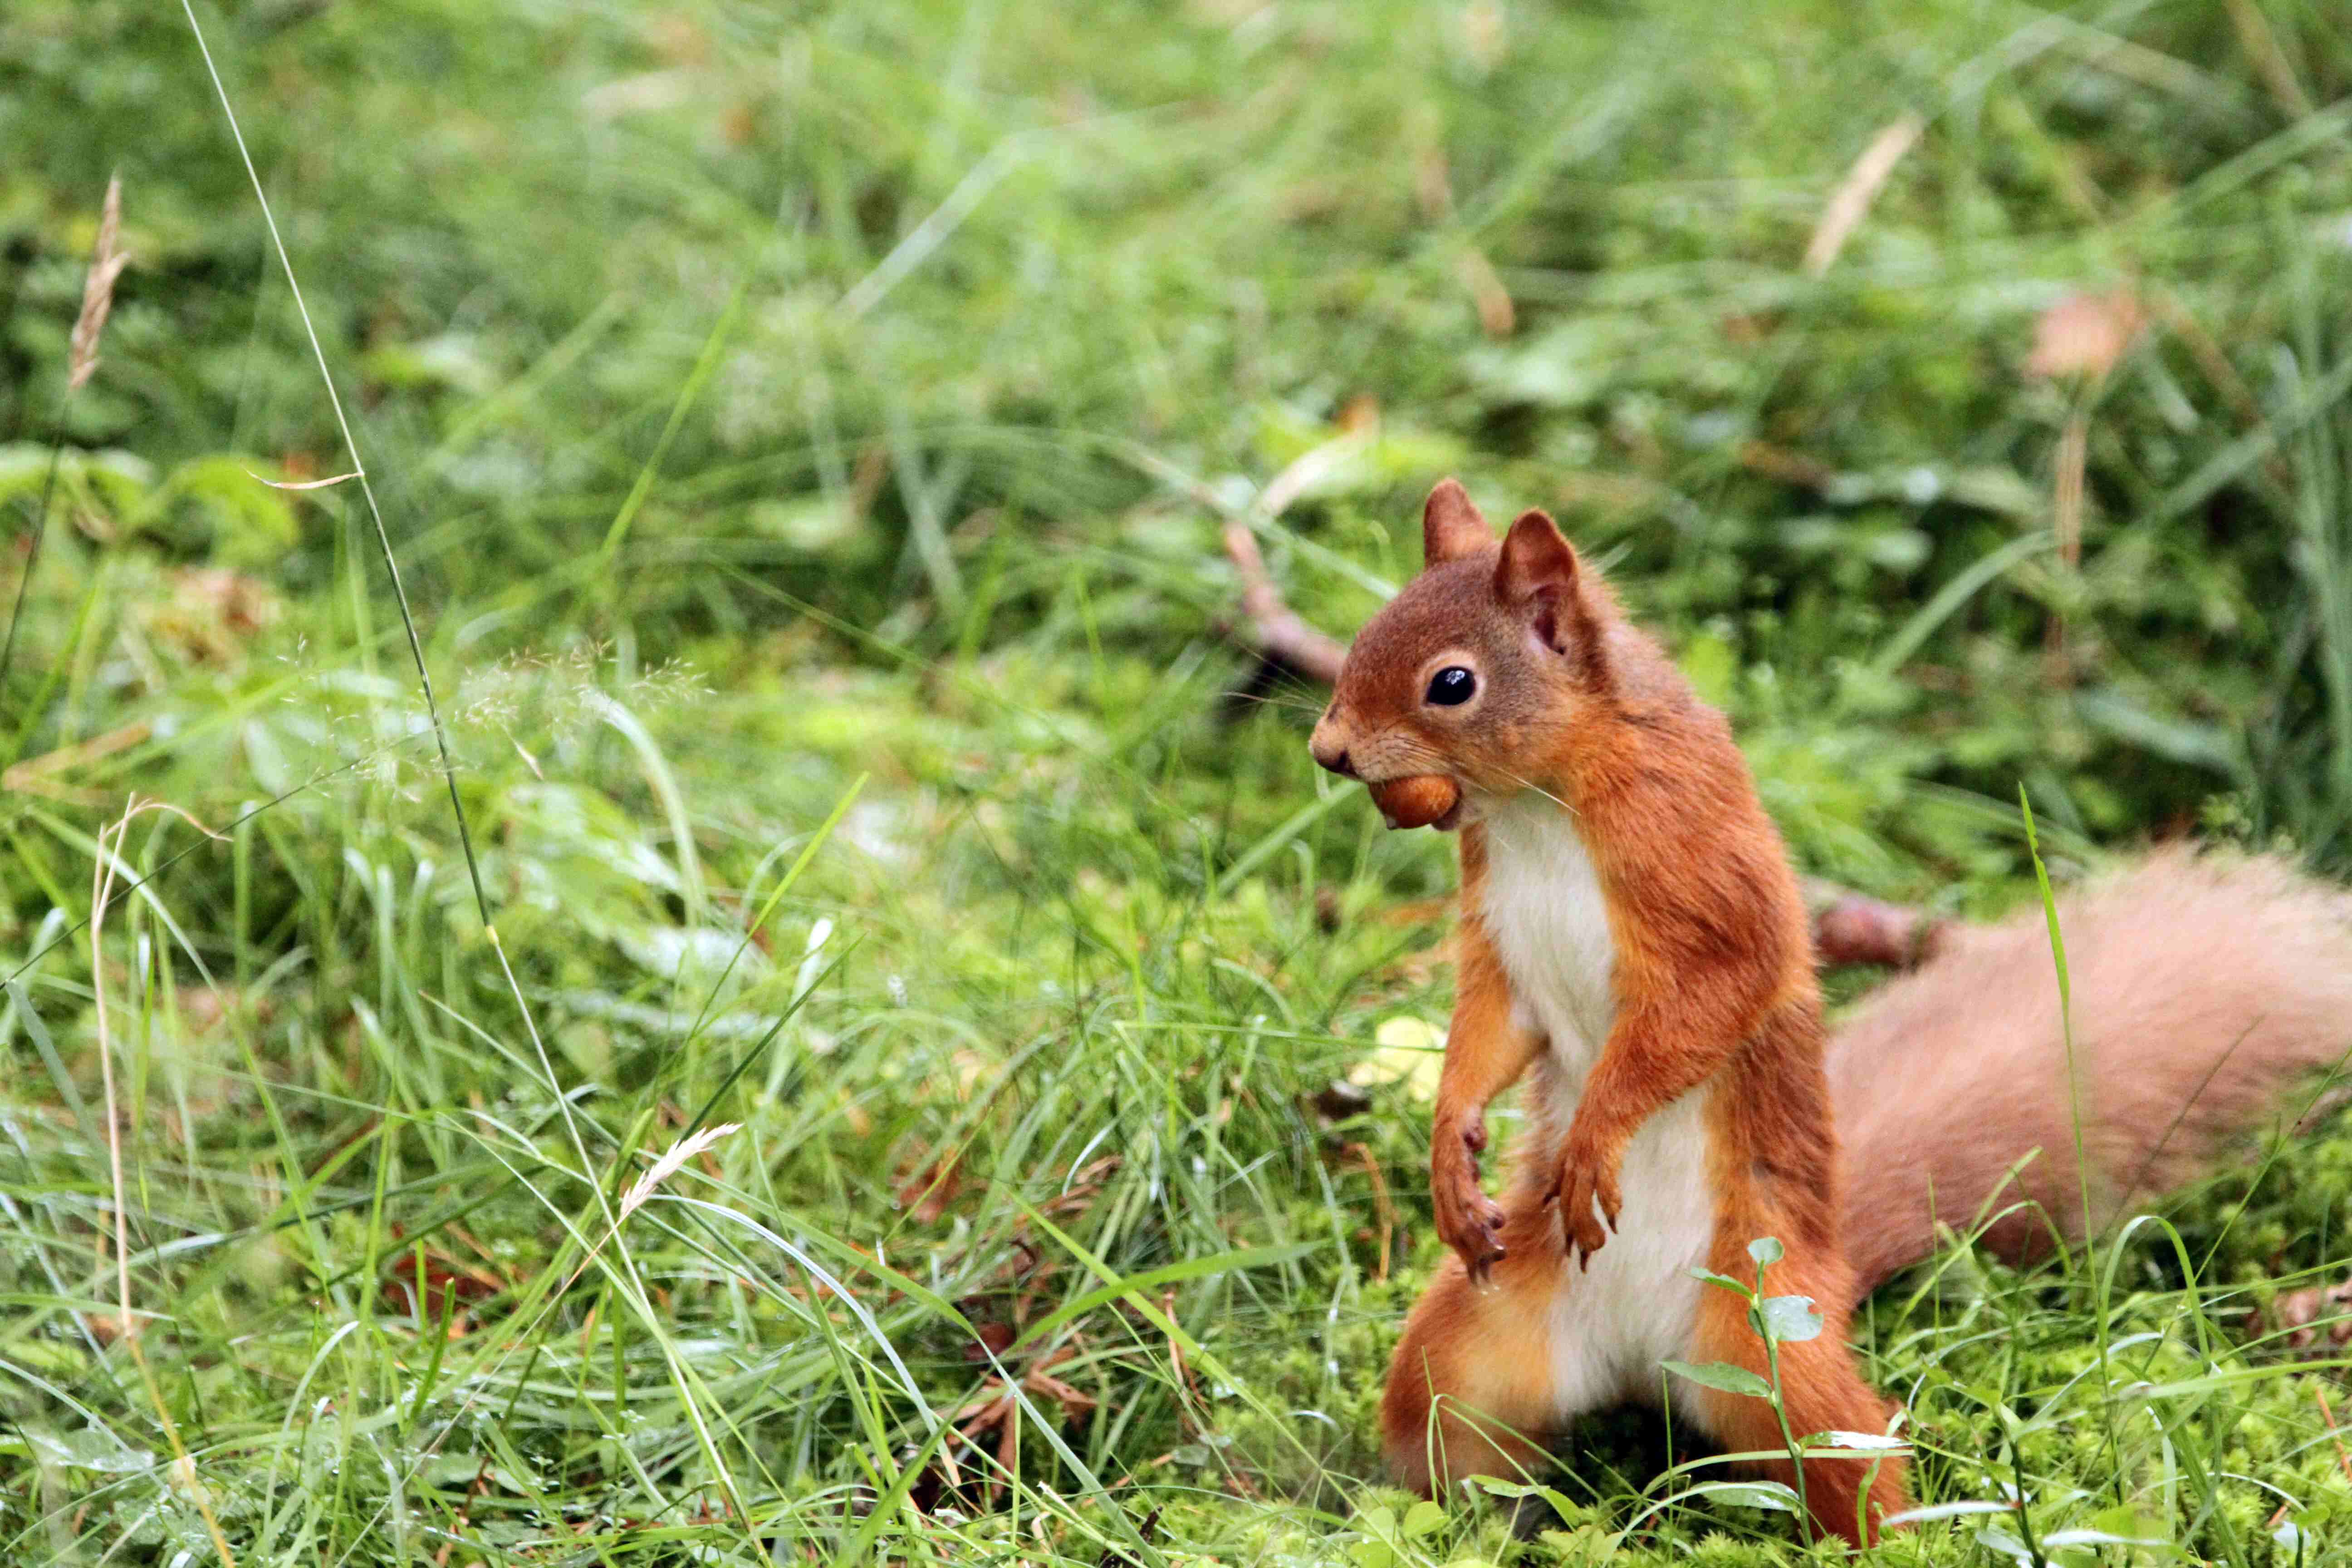 Red squirrel standing on hind legs in the grass looking to the left. IMAGE: Laura Moore 2022